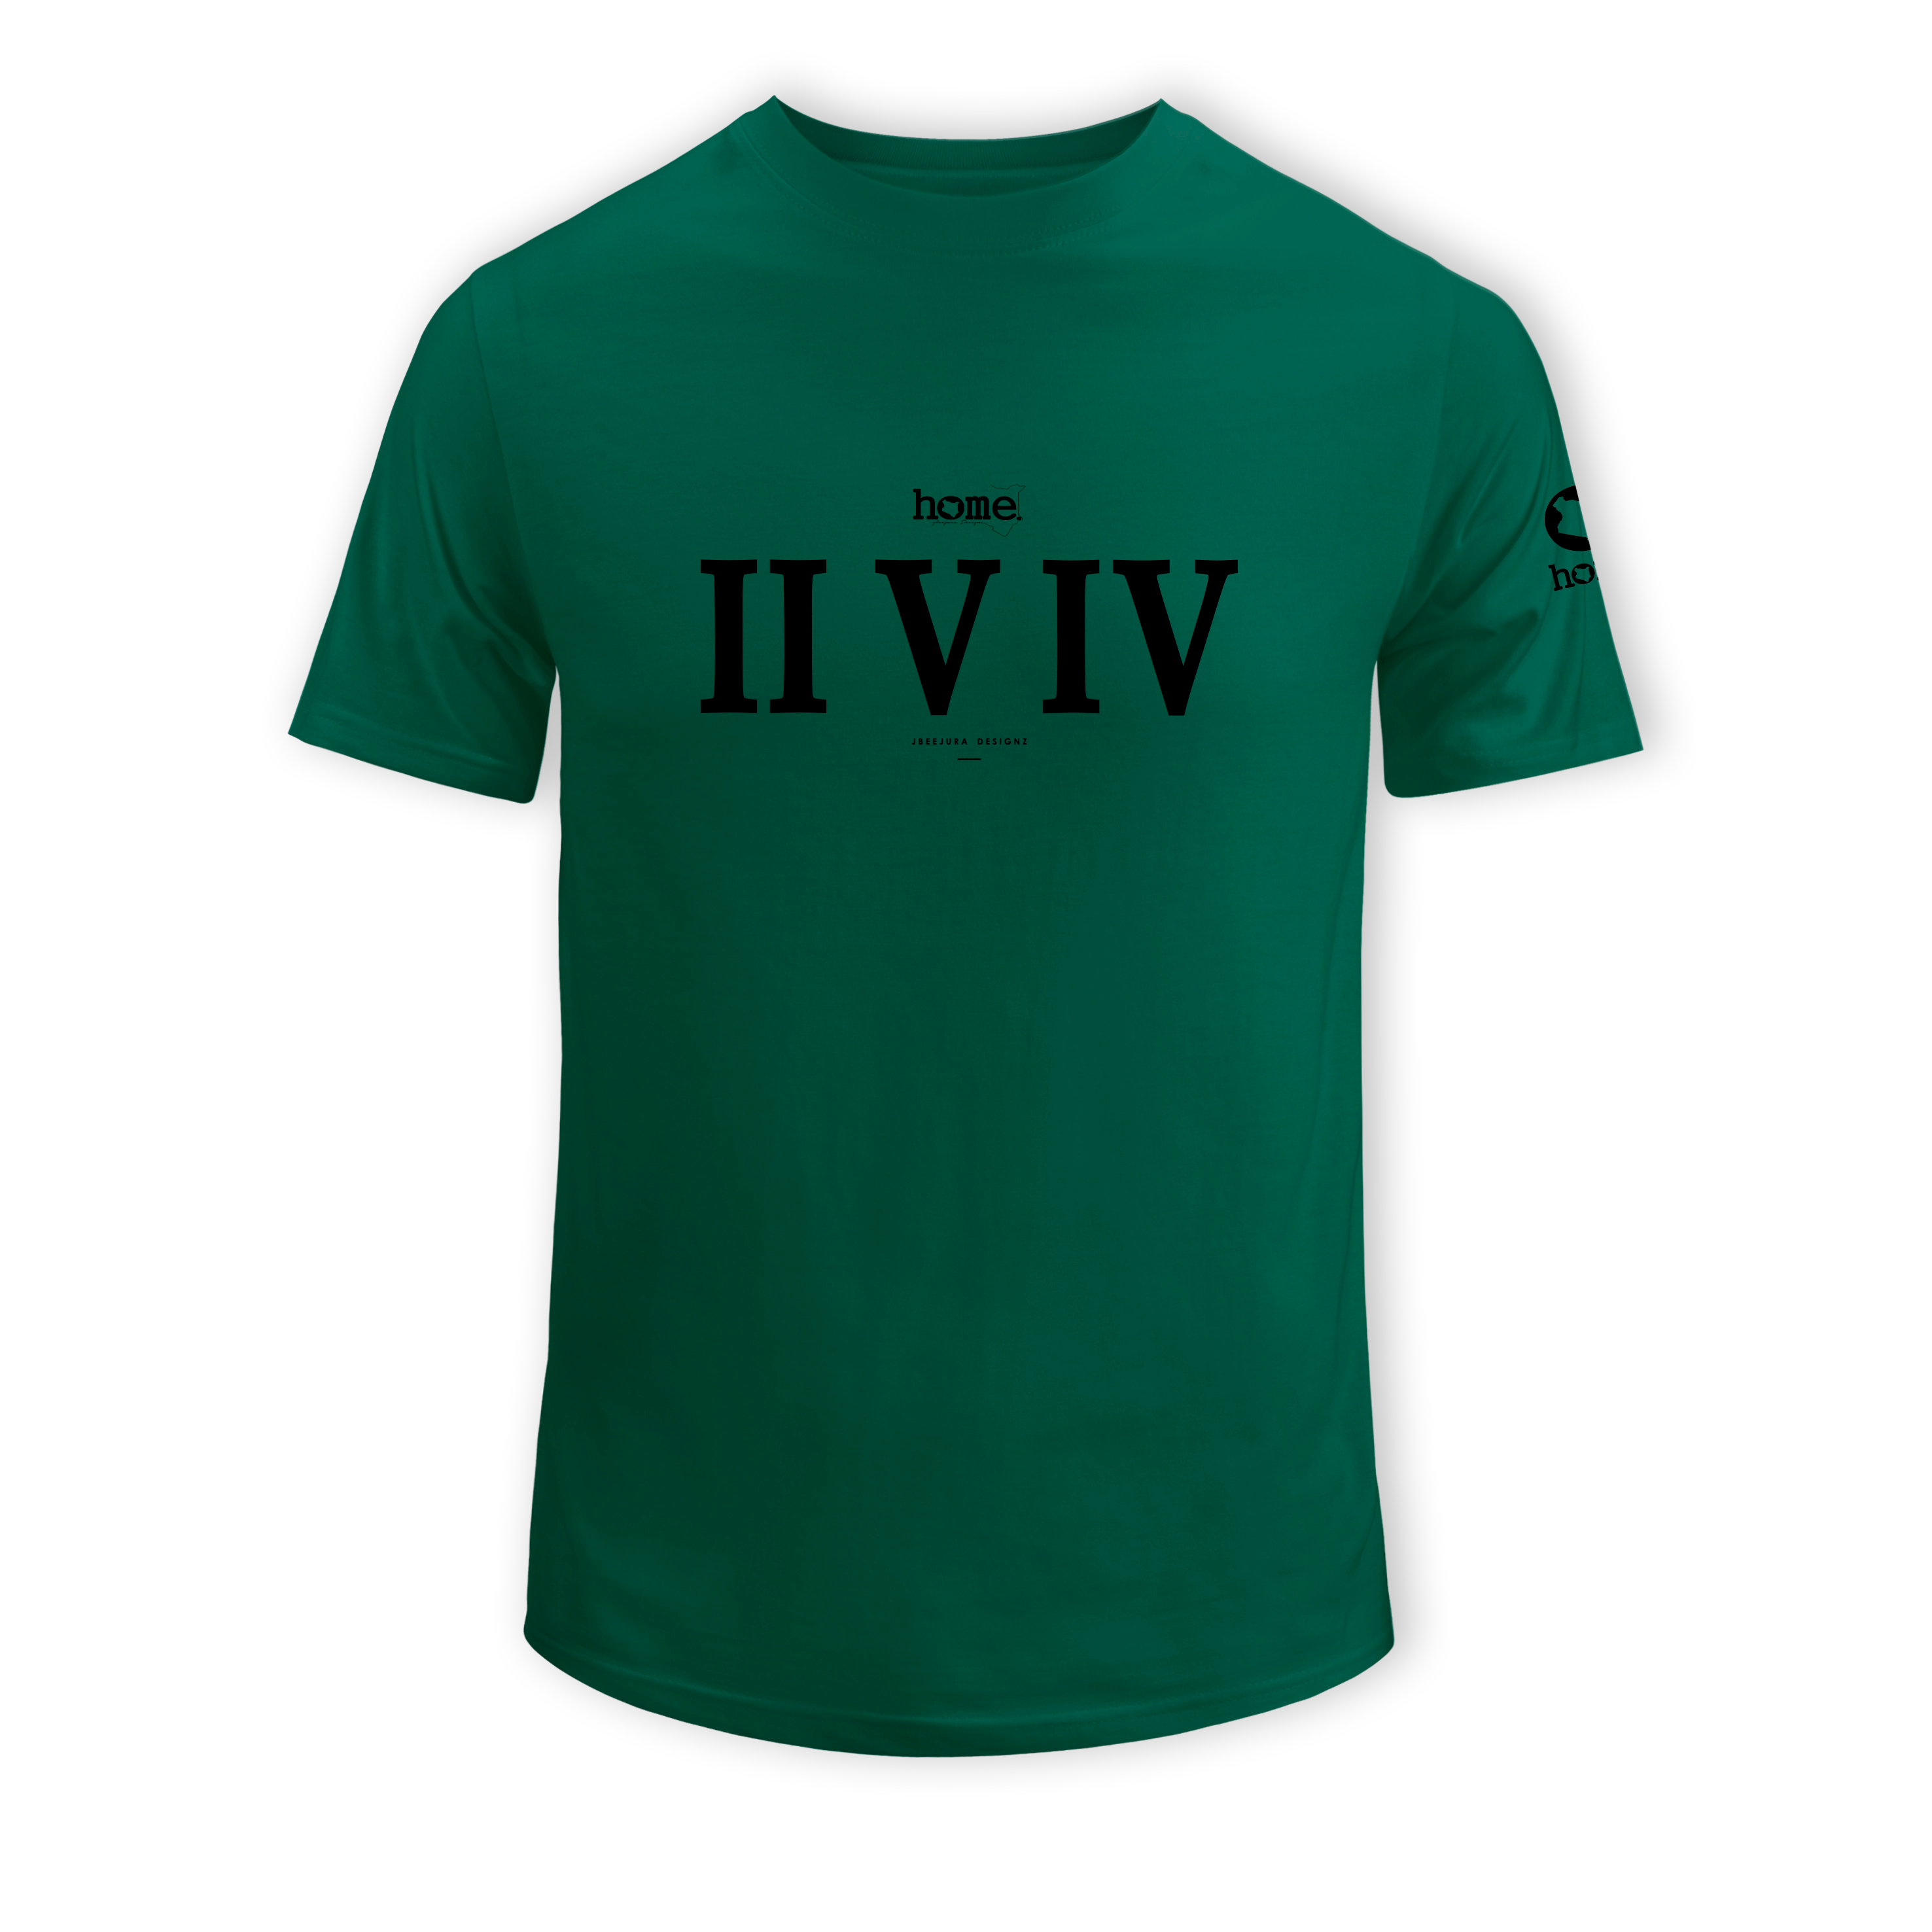 home_254 SHORT-SLEEVED RICH GREEN T-SHIRT WITH A BLACK MAP ROMAN NUMERALS  PRINT – COTTON PLUS FABRIC